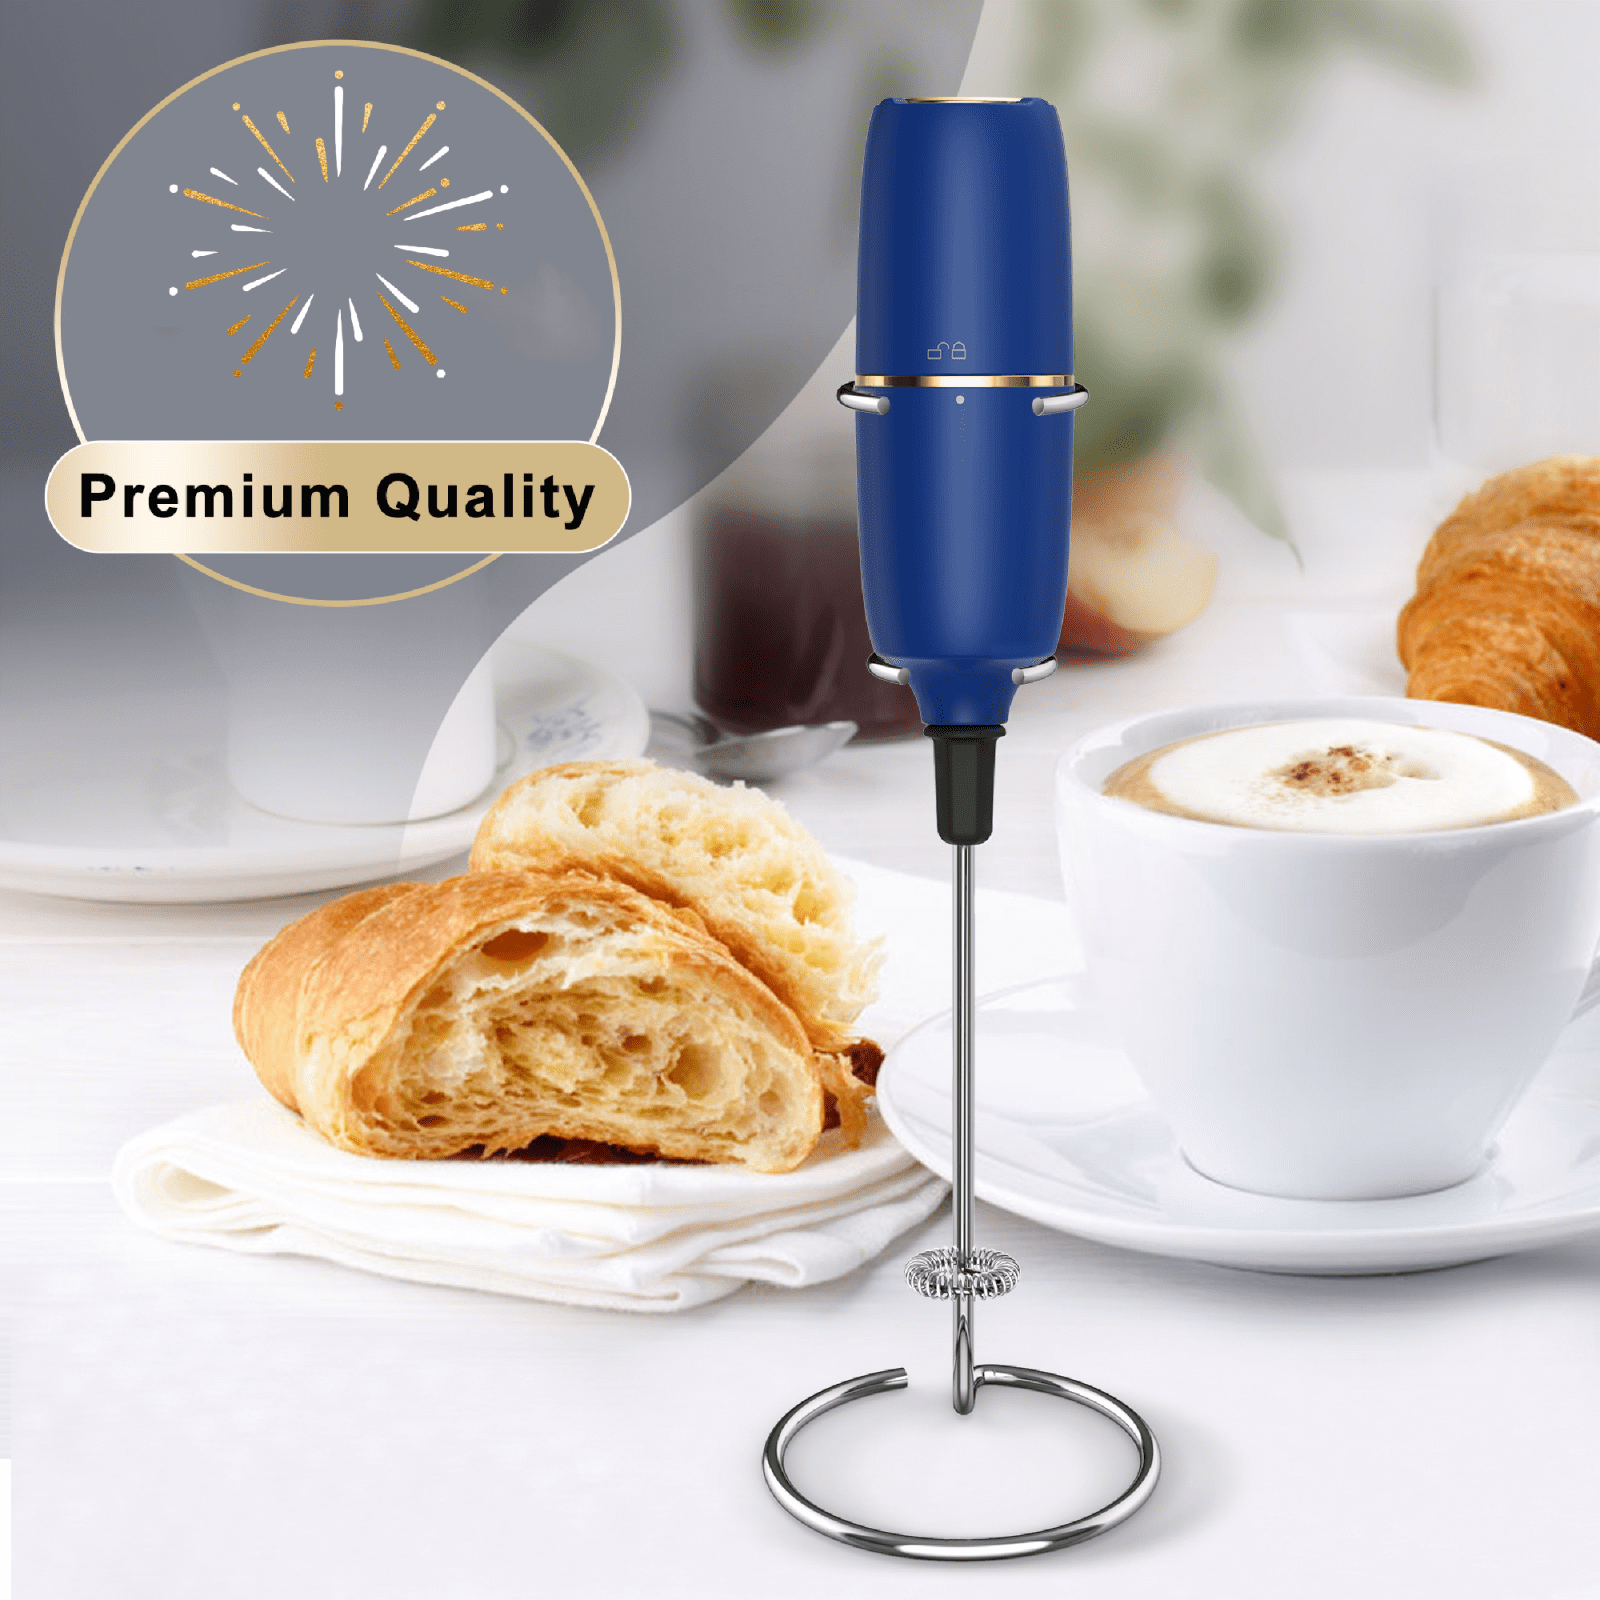  Milk Frother Rechargeable, Mathtoxyz Stainless Steel Milk  Frothers Handheld Foam Maker Travel Kitchen Coffee Frother Wand for Coffee  Lattes Cappuccino Matcha Hot Chocolate: Home & Kitchen